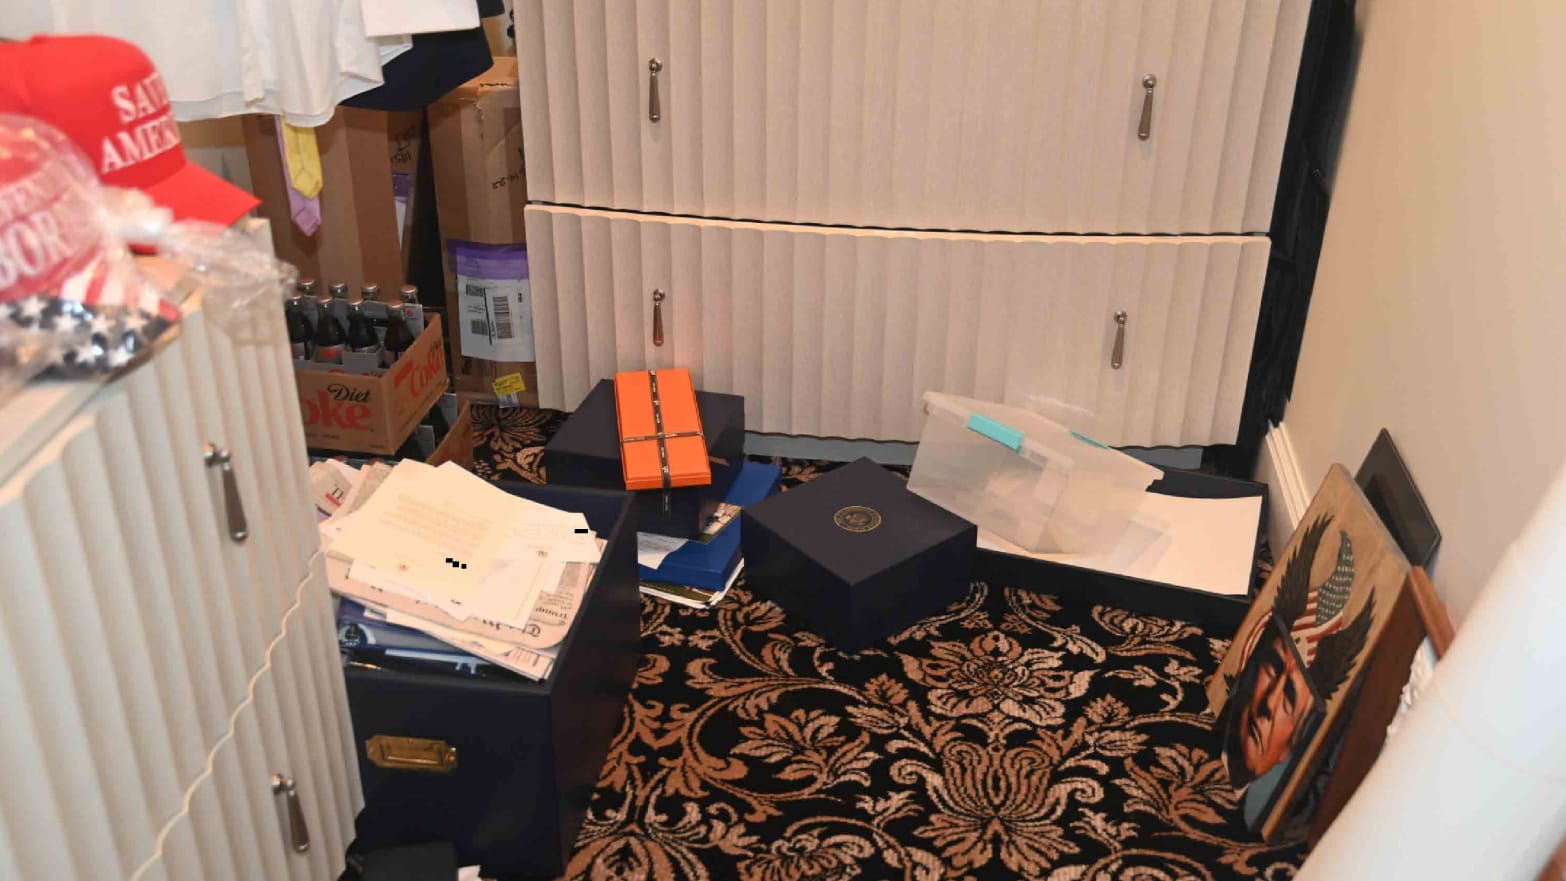 A photo of an unsecured box, allegedly containing sensitive U.S. secrets, at Mar-a-Lago.